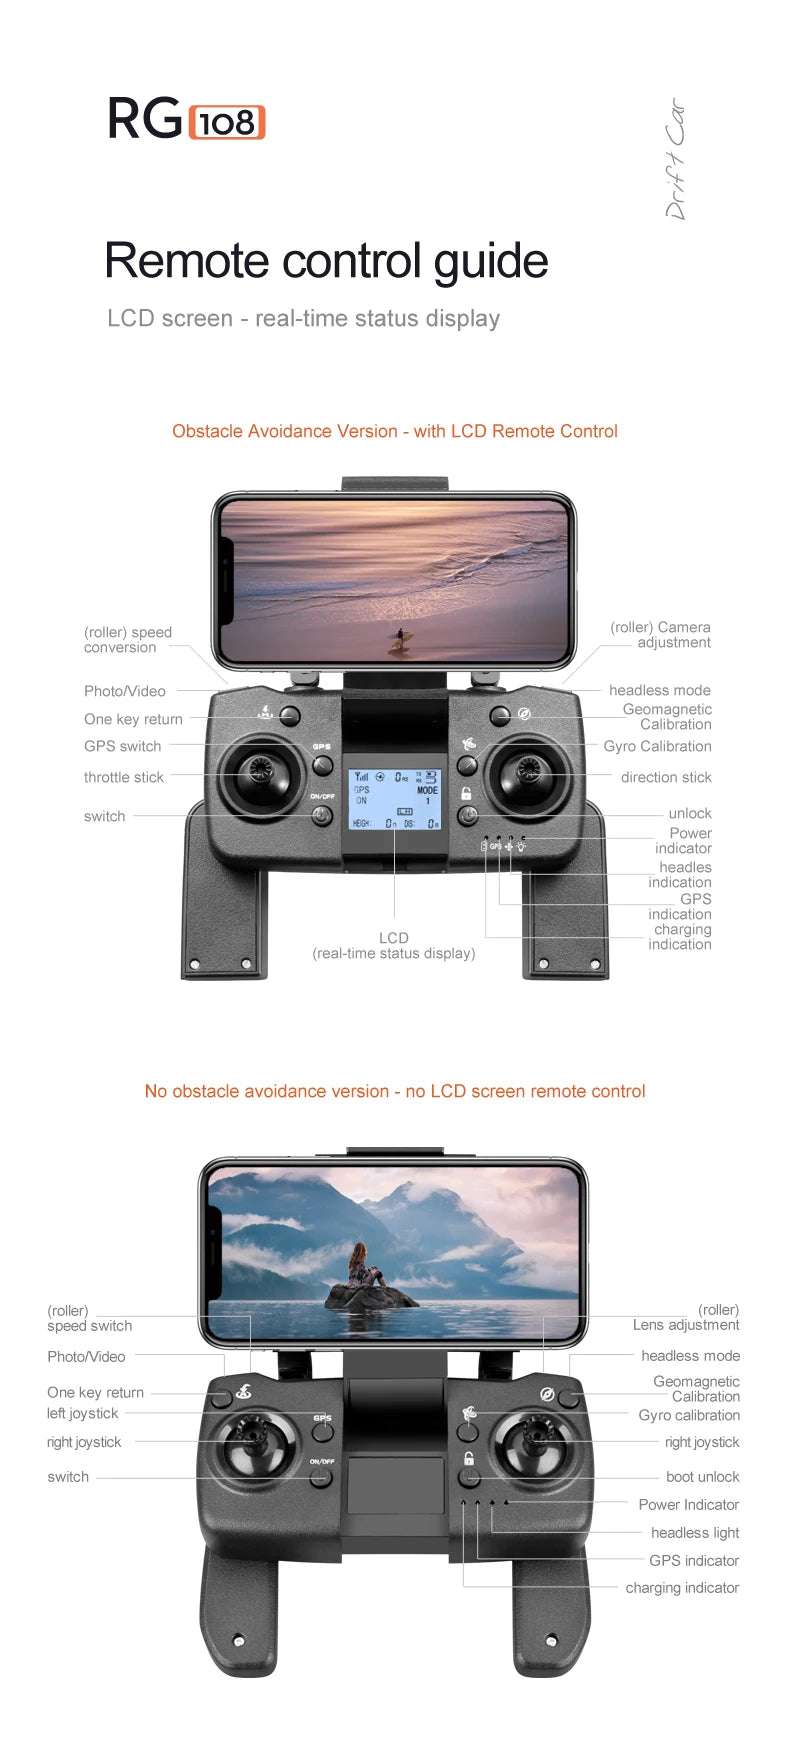 RG108 MAX Drone, no obstacle avoidance version no LCD screen remote control (roller) speed switch Lens adjustment Photo